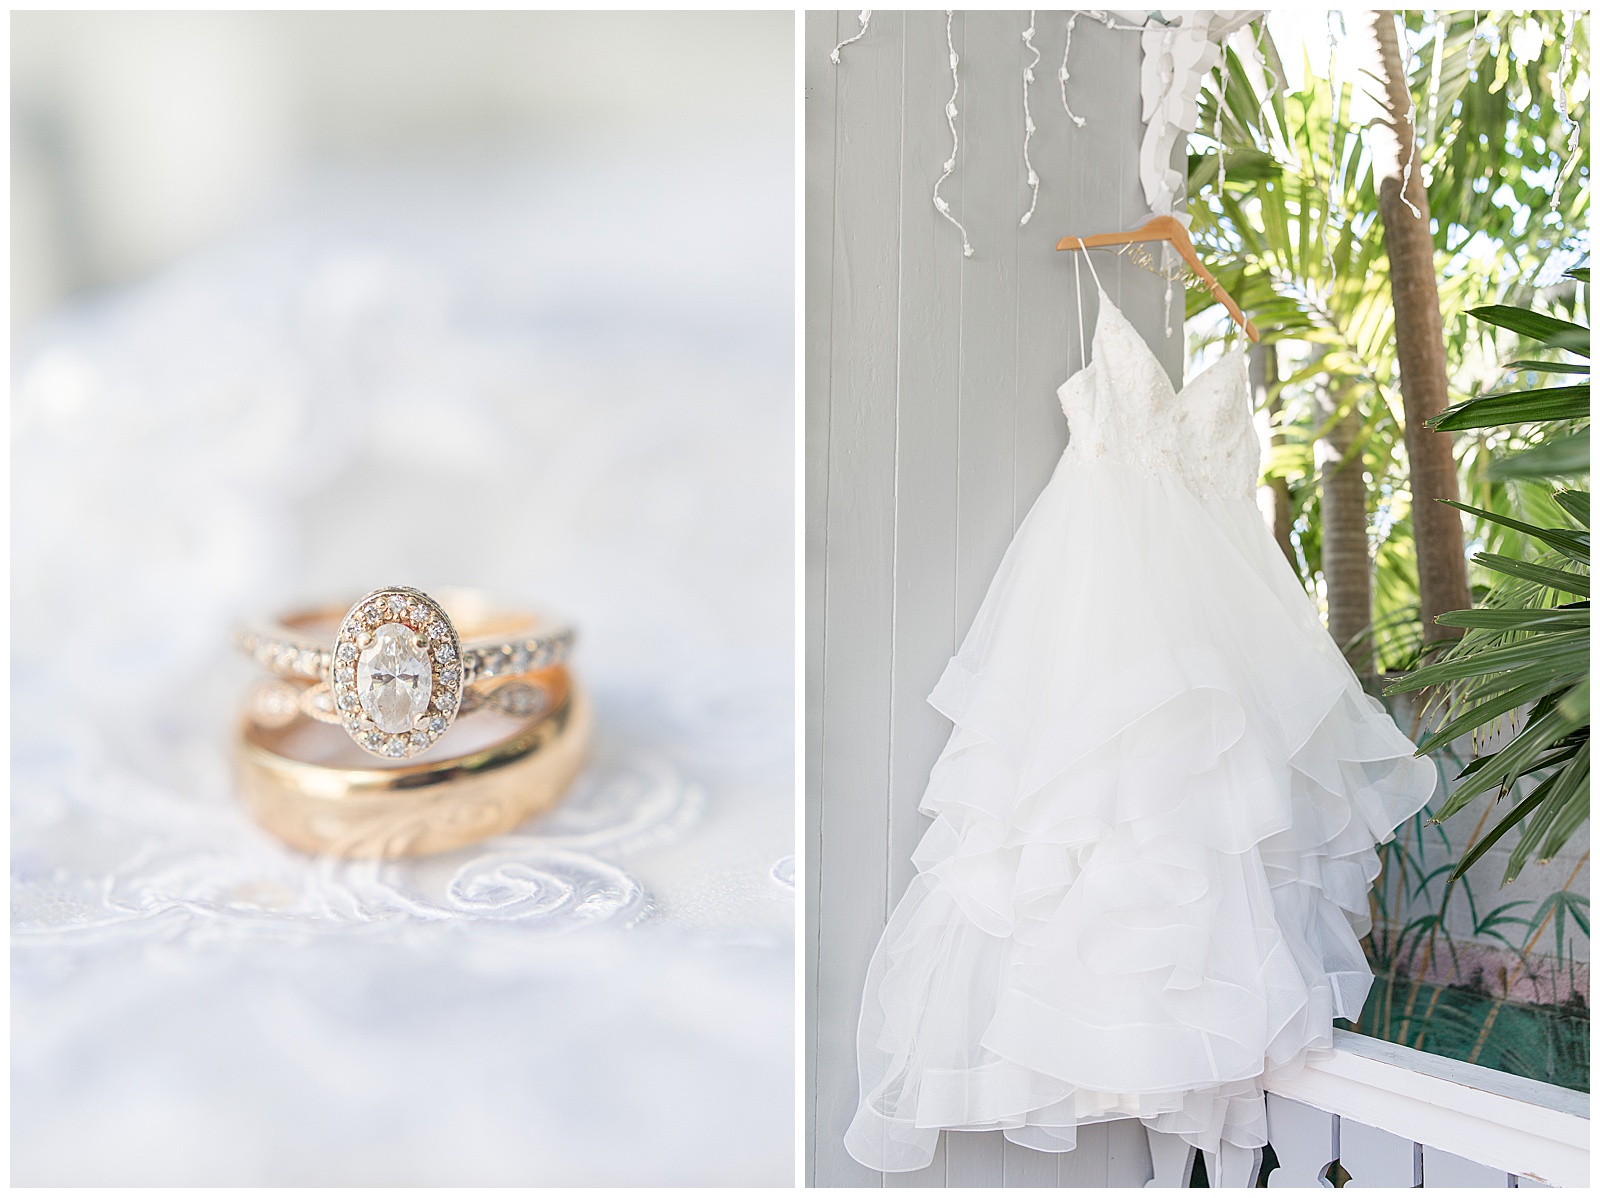 gold wedding rings and white ruffled wedding gown on display against white background